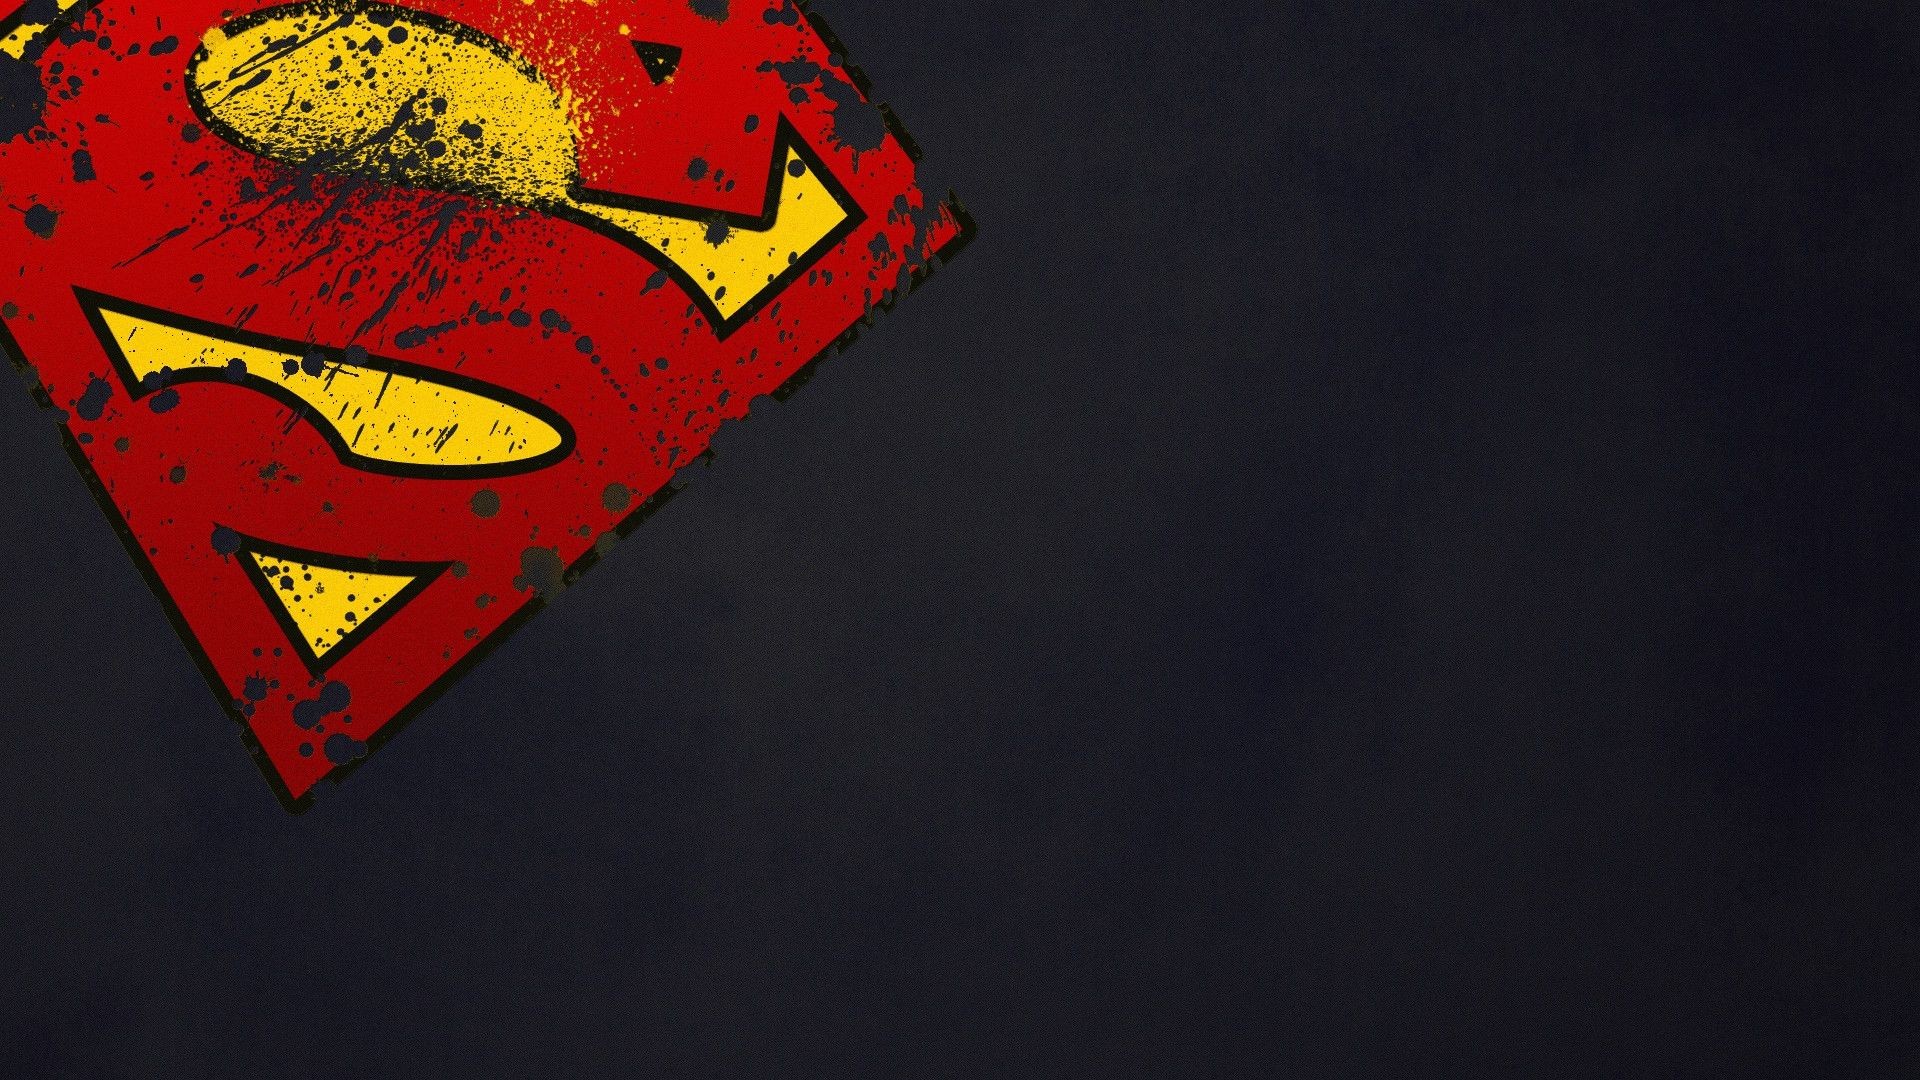 Superhero Background Download Free Awesome HD Backgrounds For